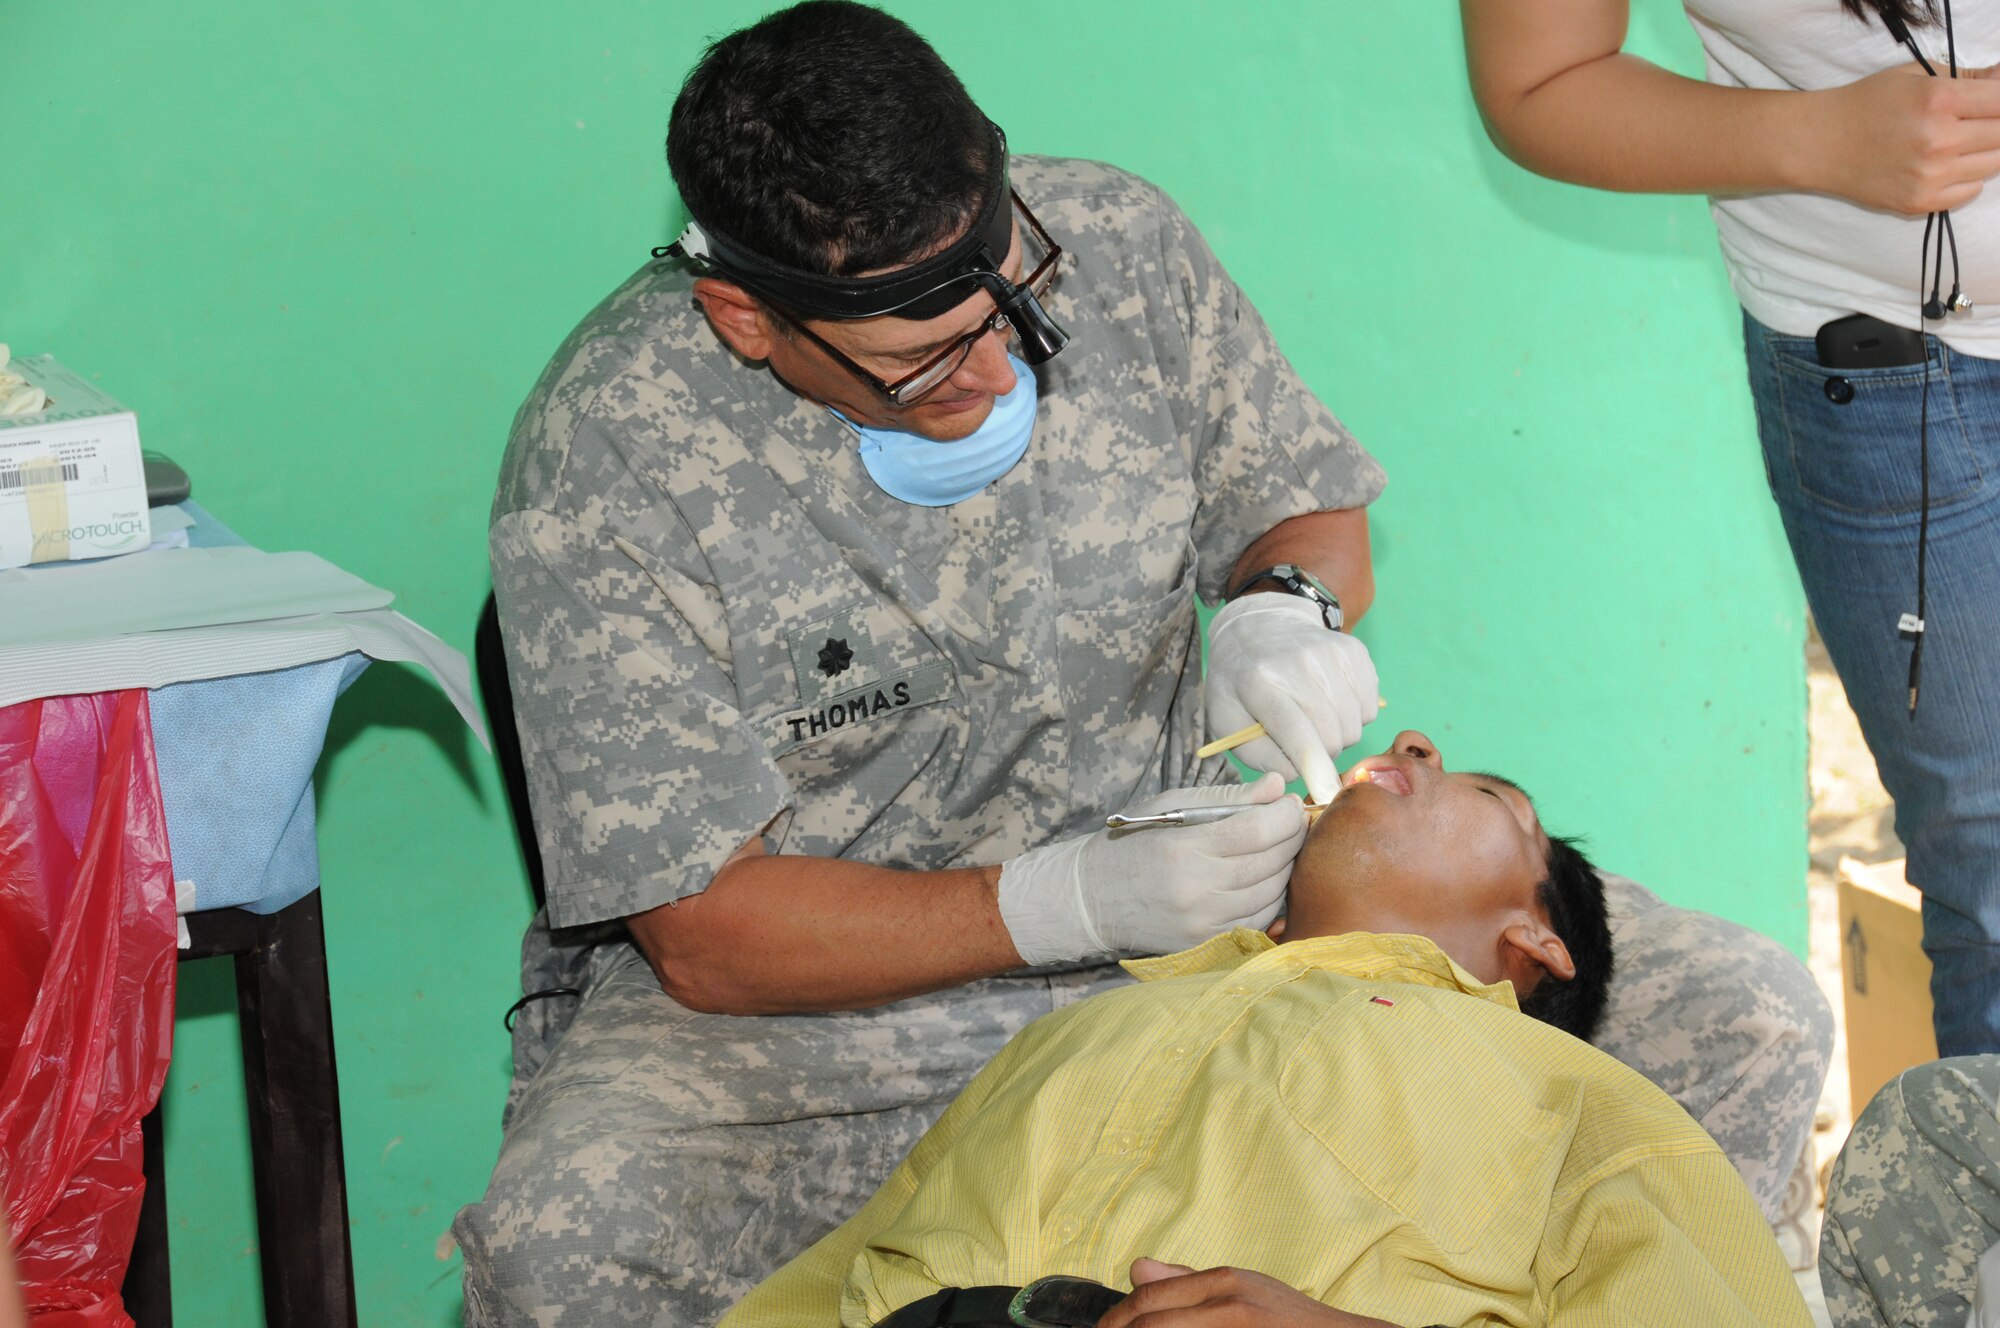 U. S. Army dentist Lt. Col. Mauri Thomas performs a dental examination during a Medical Readiness Training Exercise in El Naranjo, a remote village in the La Paz region of Honduras, April 24-25.  The Medical Element, with support from JTF-Bravo Joint Security Forces, partnered with the Honduran Ministry of Health, the Honduran National Police, and the Honduran military to provide medical care to nearly 1,000 people over a two day period.  The teams worked together to provide preventive medicine to their patients which included classes on hygiene, hand washing, preventive dental care, and nutrition.  They also provided immunizations to infants, dental care, well women screenings, wellness checkups, medications, and minor medical procedures.  (Photo by U. S. Air National Guard Capt. Steven Stubbs)